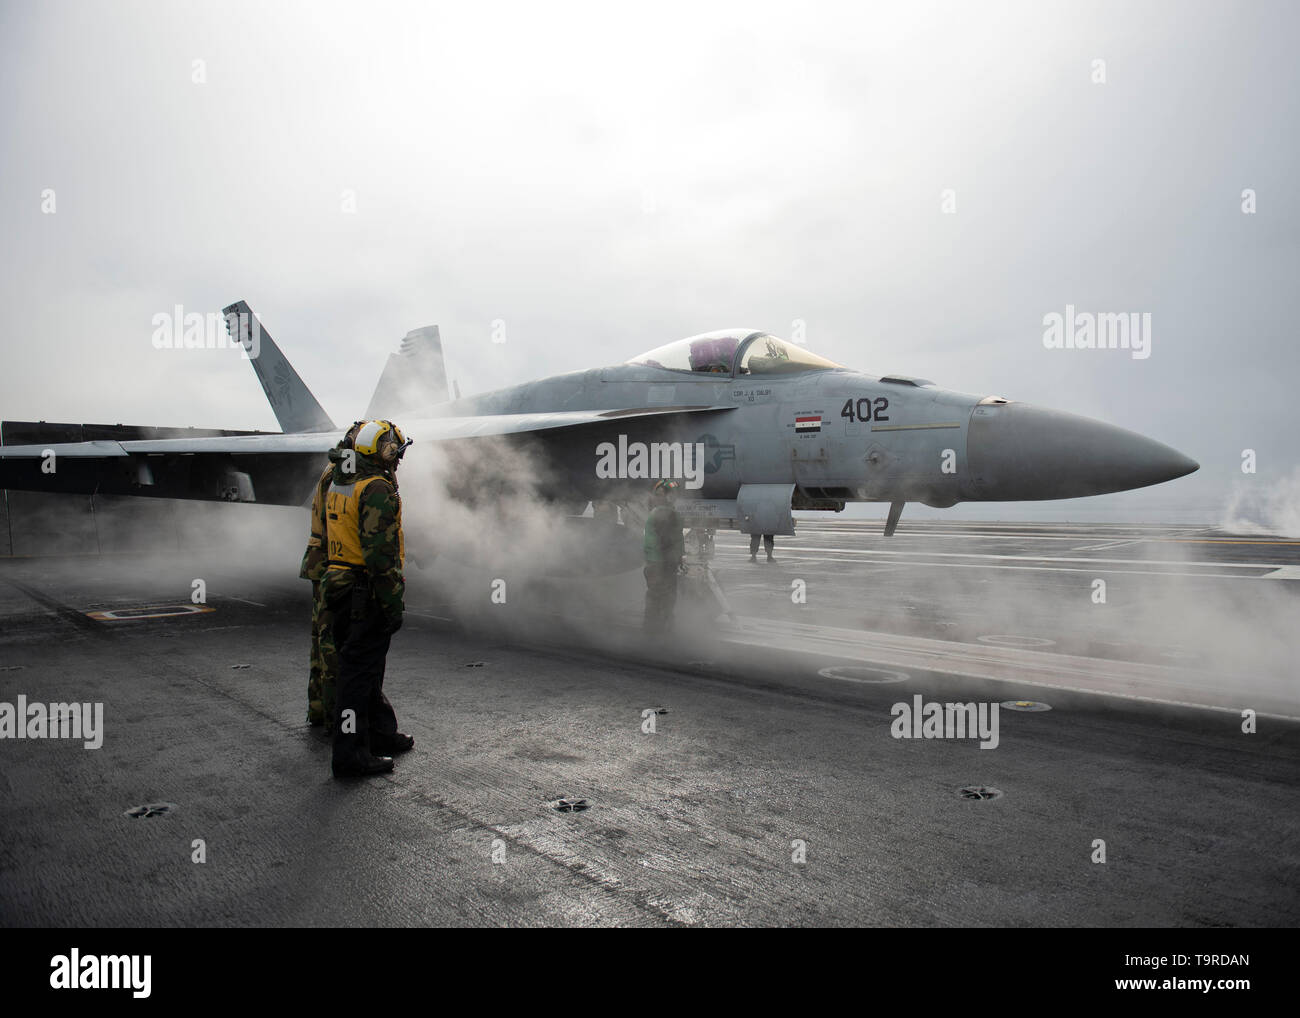 190515-N-GQ458-1018 GULF OF ALASKA (May 15, 2019) Sailors stand by an F/A-18F Super Hornet assigned to the “Golden Warriors” of Strike Fighter Squadron (VFA) 87 before starting flight operations on the flight deck of the aircraft carrier USS Theodore Roosevelt (CVN 71) while participating in Exercise Northern Edge 2019. Northern Edge is one in a series of U.S. Indo-Pacific Command exercises in 2019 that prepares joint forces to respond to crisis in the Indo-Pacific region. (U.S. Navy photo by Mass Communication Specialist 3rd Class Austin J. Breum/Released) Stock Photo